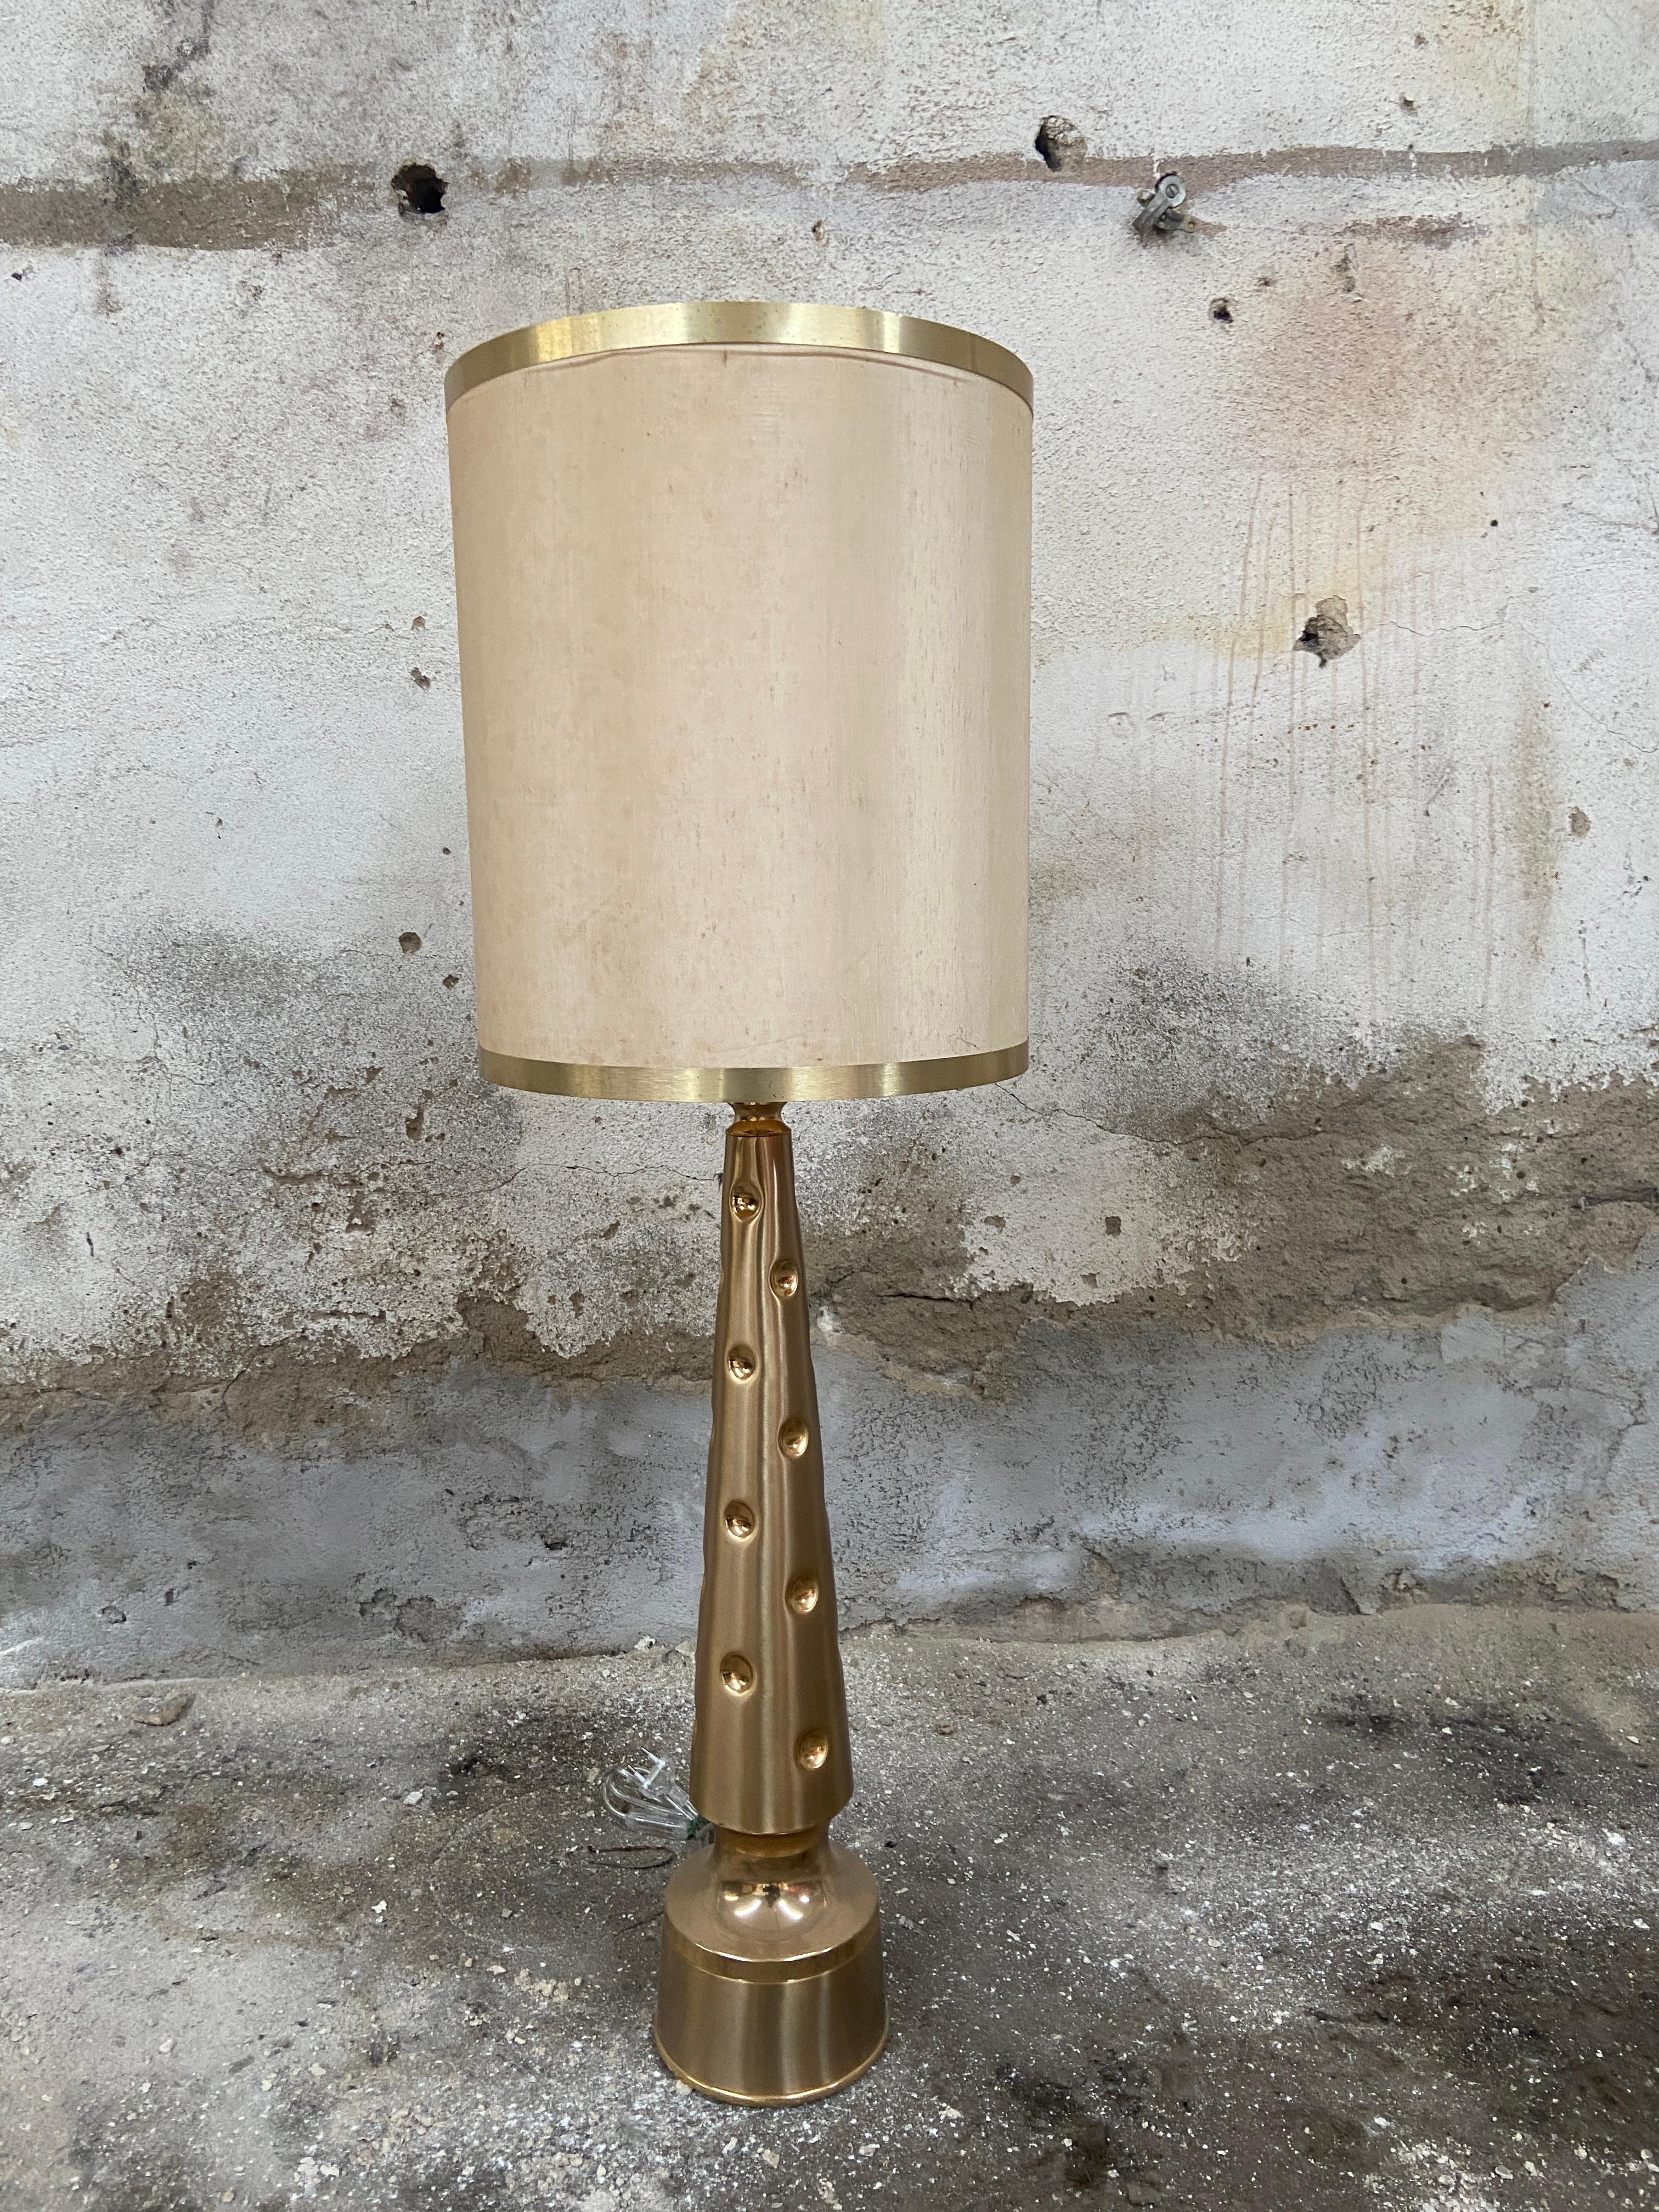 Mid-Century Modern Italian Gilt Metal Table Lamp with its Original Silk Lampshade.
The lamp is hardwired with European electrification
Lamp measurements: Diameter cm.16, Height cm.74
Lampshade measurements: Diameter cm.35, Height cm.43